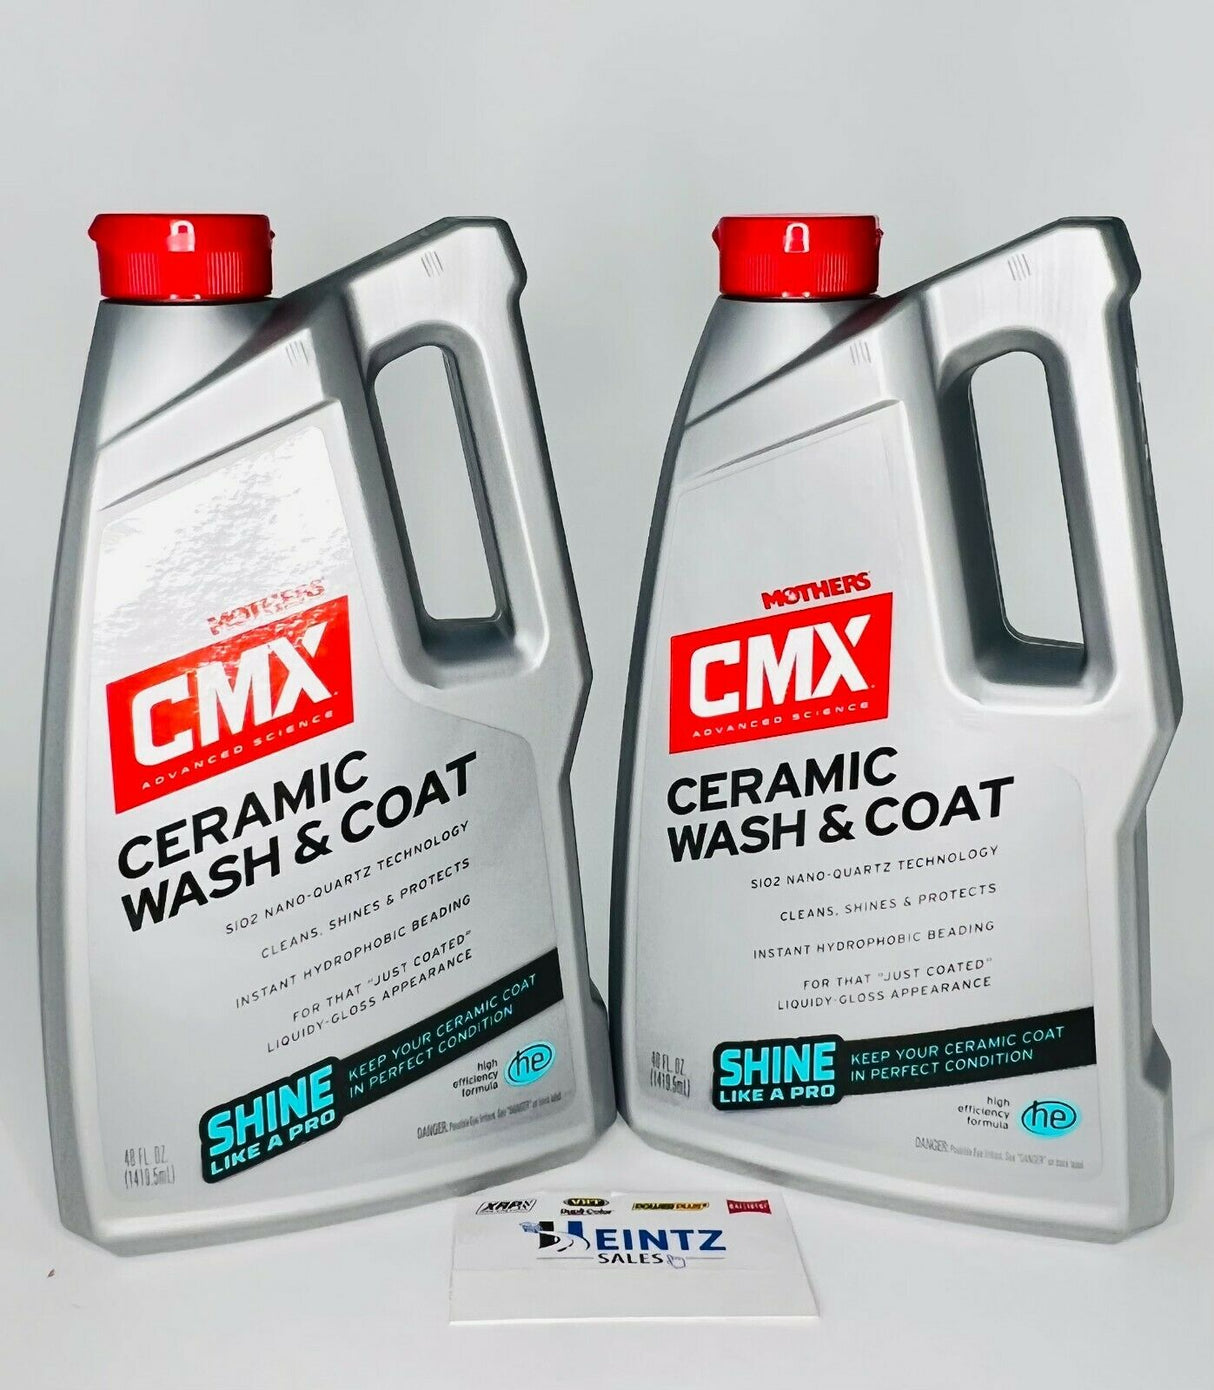 MOTHERS 01548 CMX Ceramic Wash and Coat 2 PACK - Clean - Shines - Protects - 48 oz.